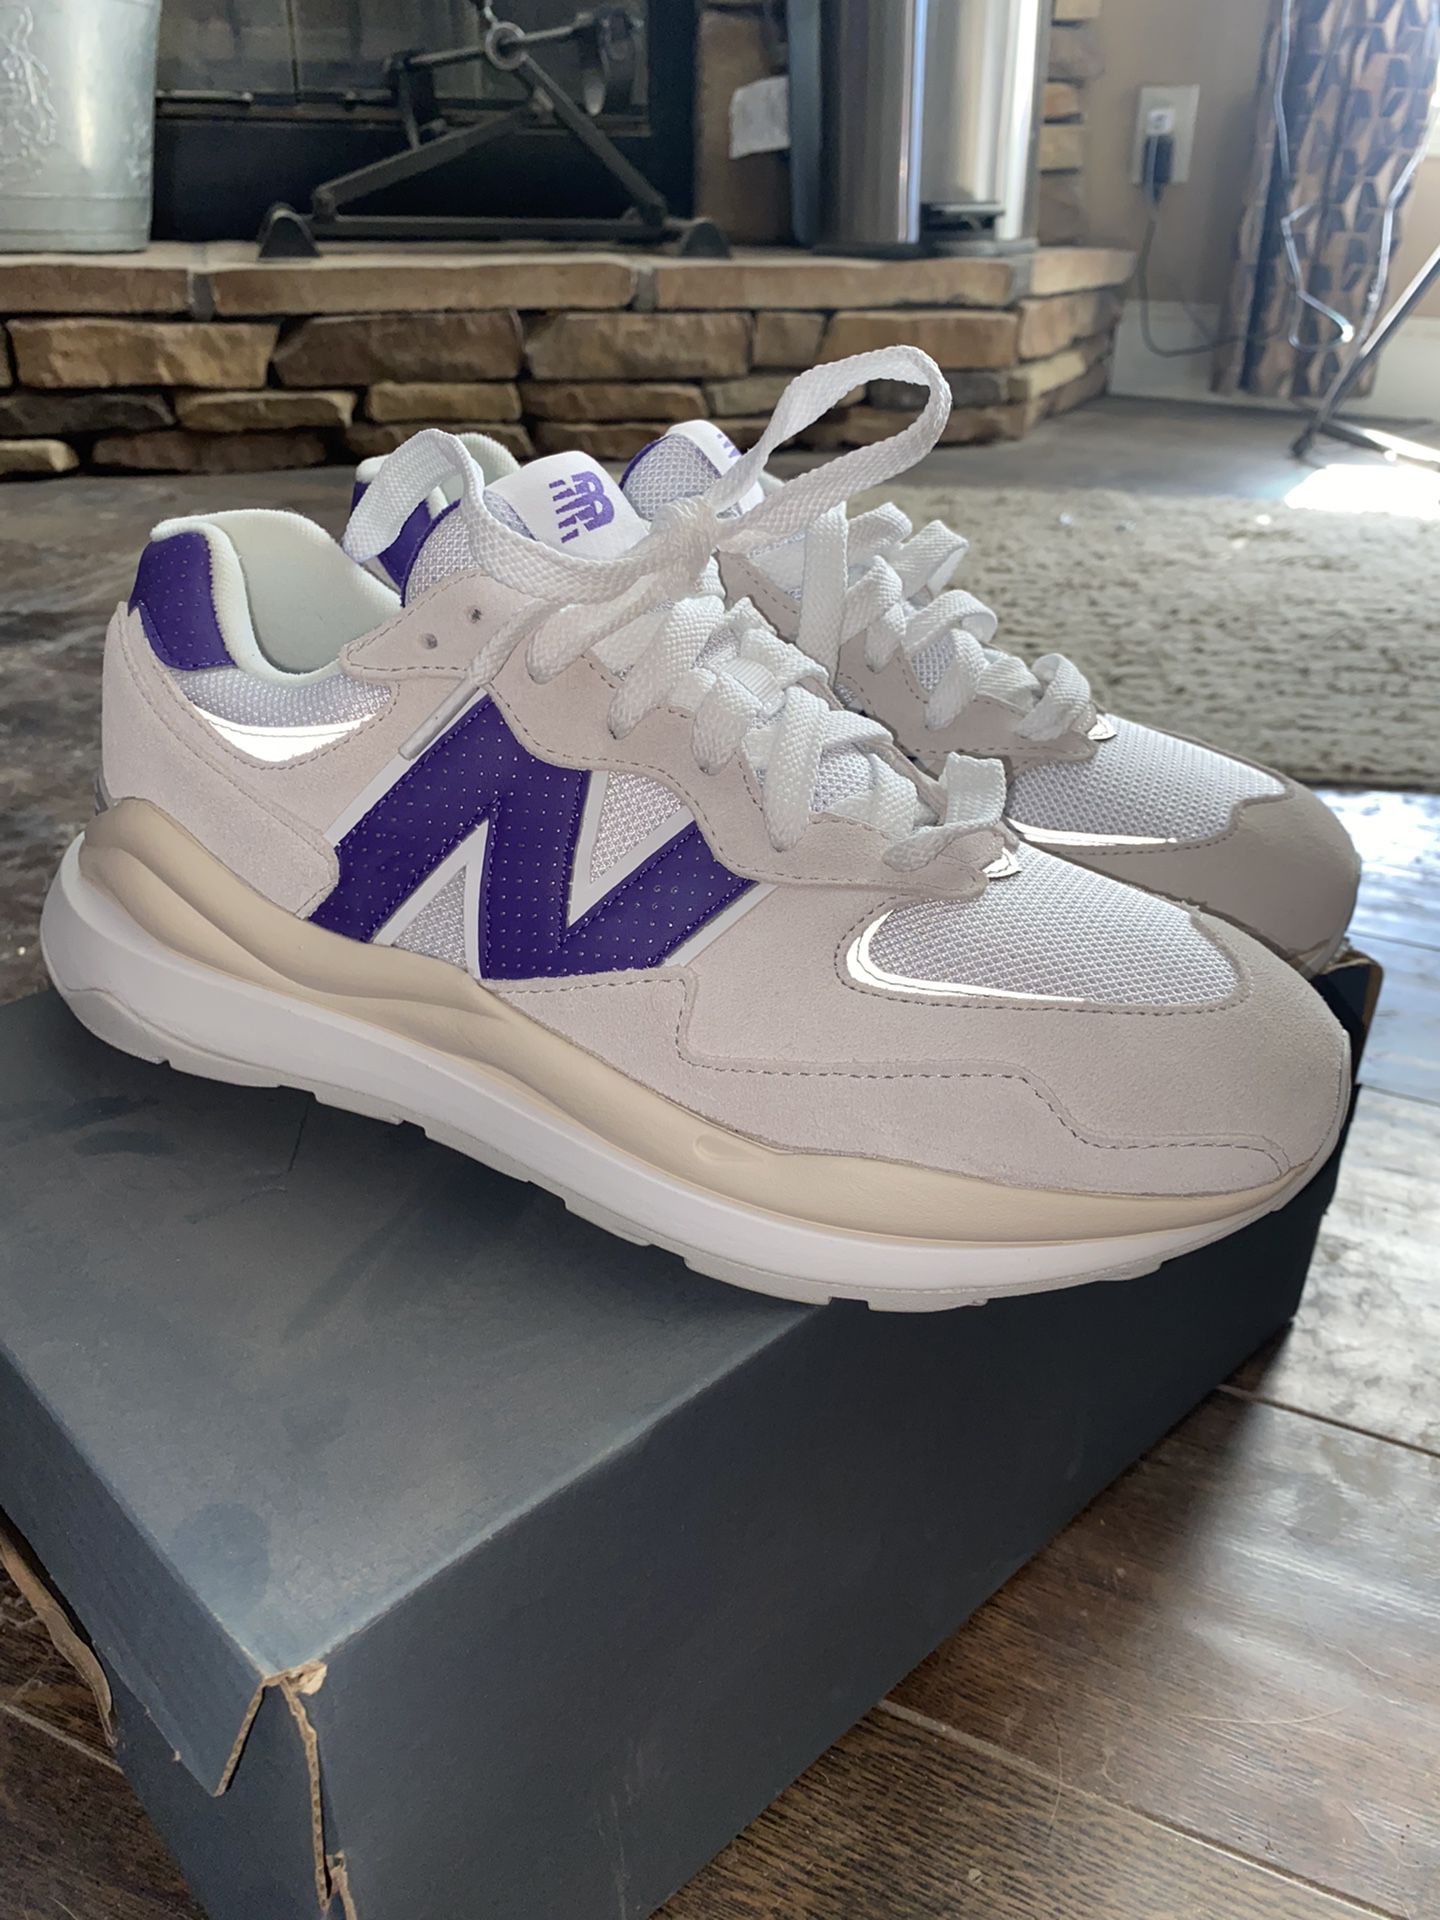 New Balance Shoes for Sale in Baton Rouge, LA - OfferUp